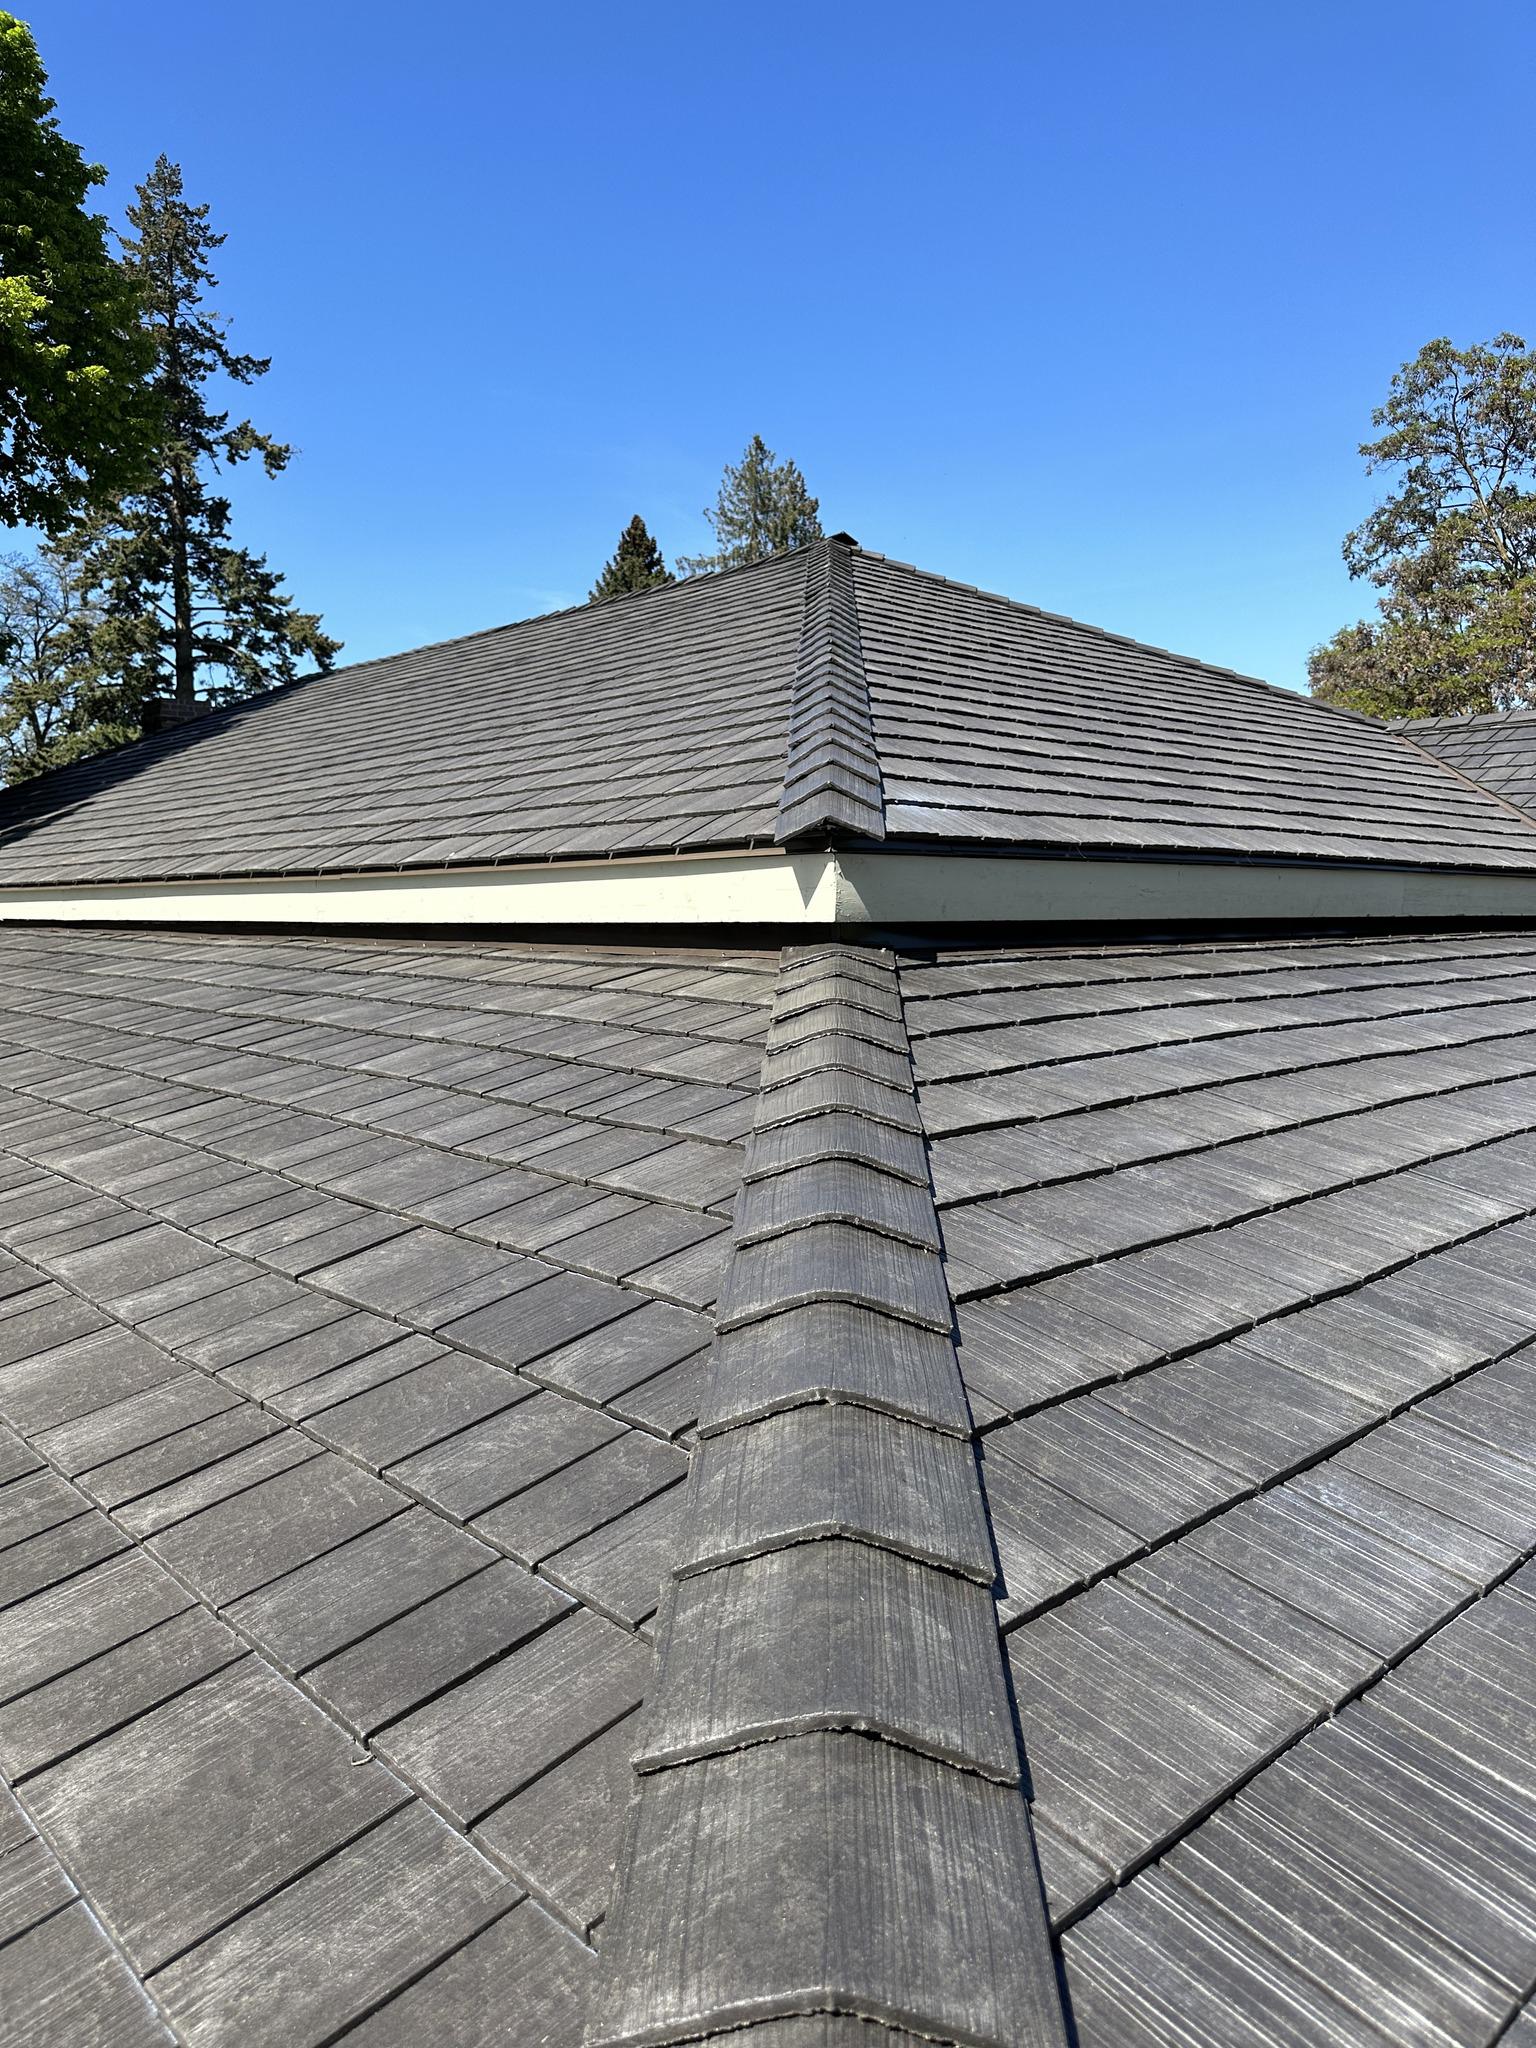 Northern Sky Roofing - Gallery 1